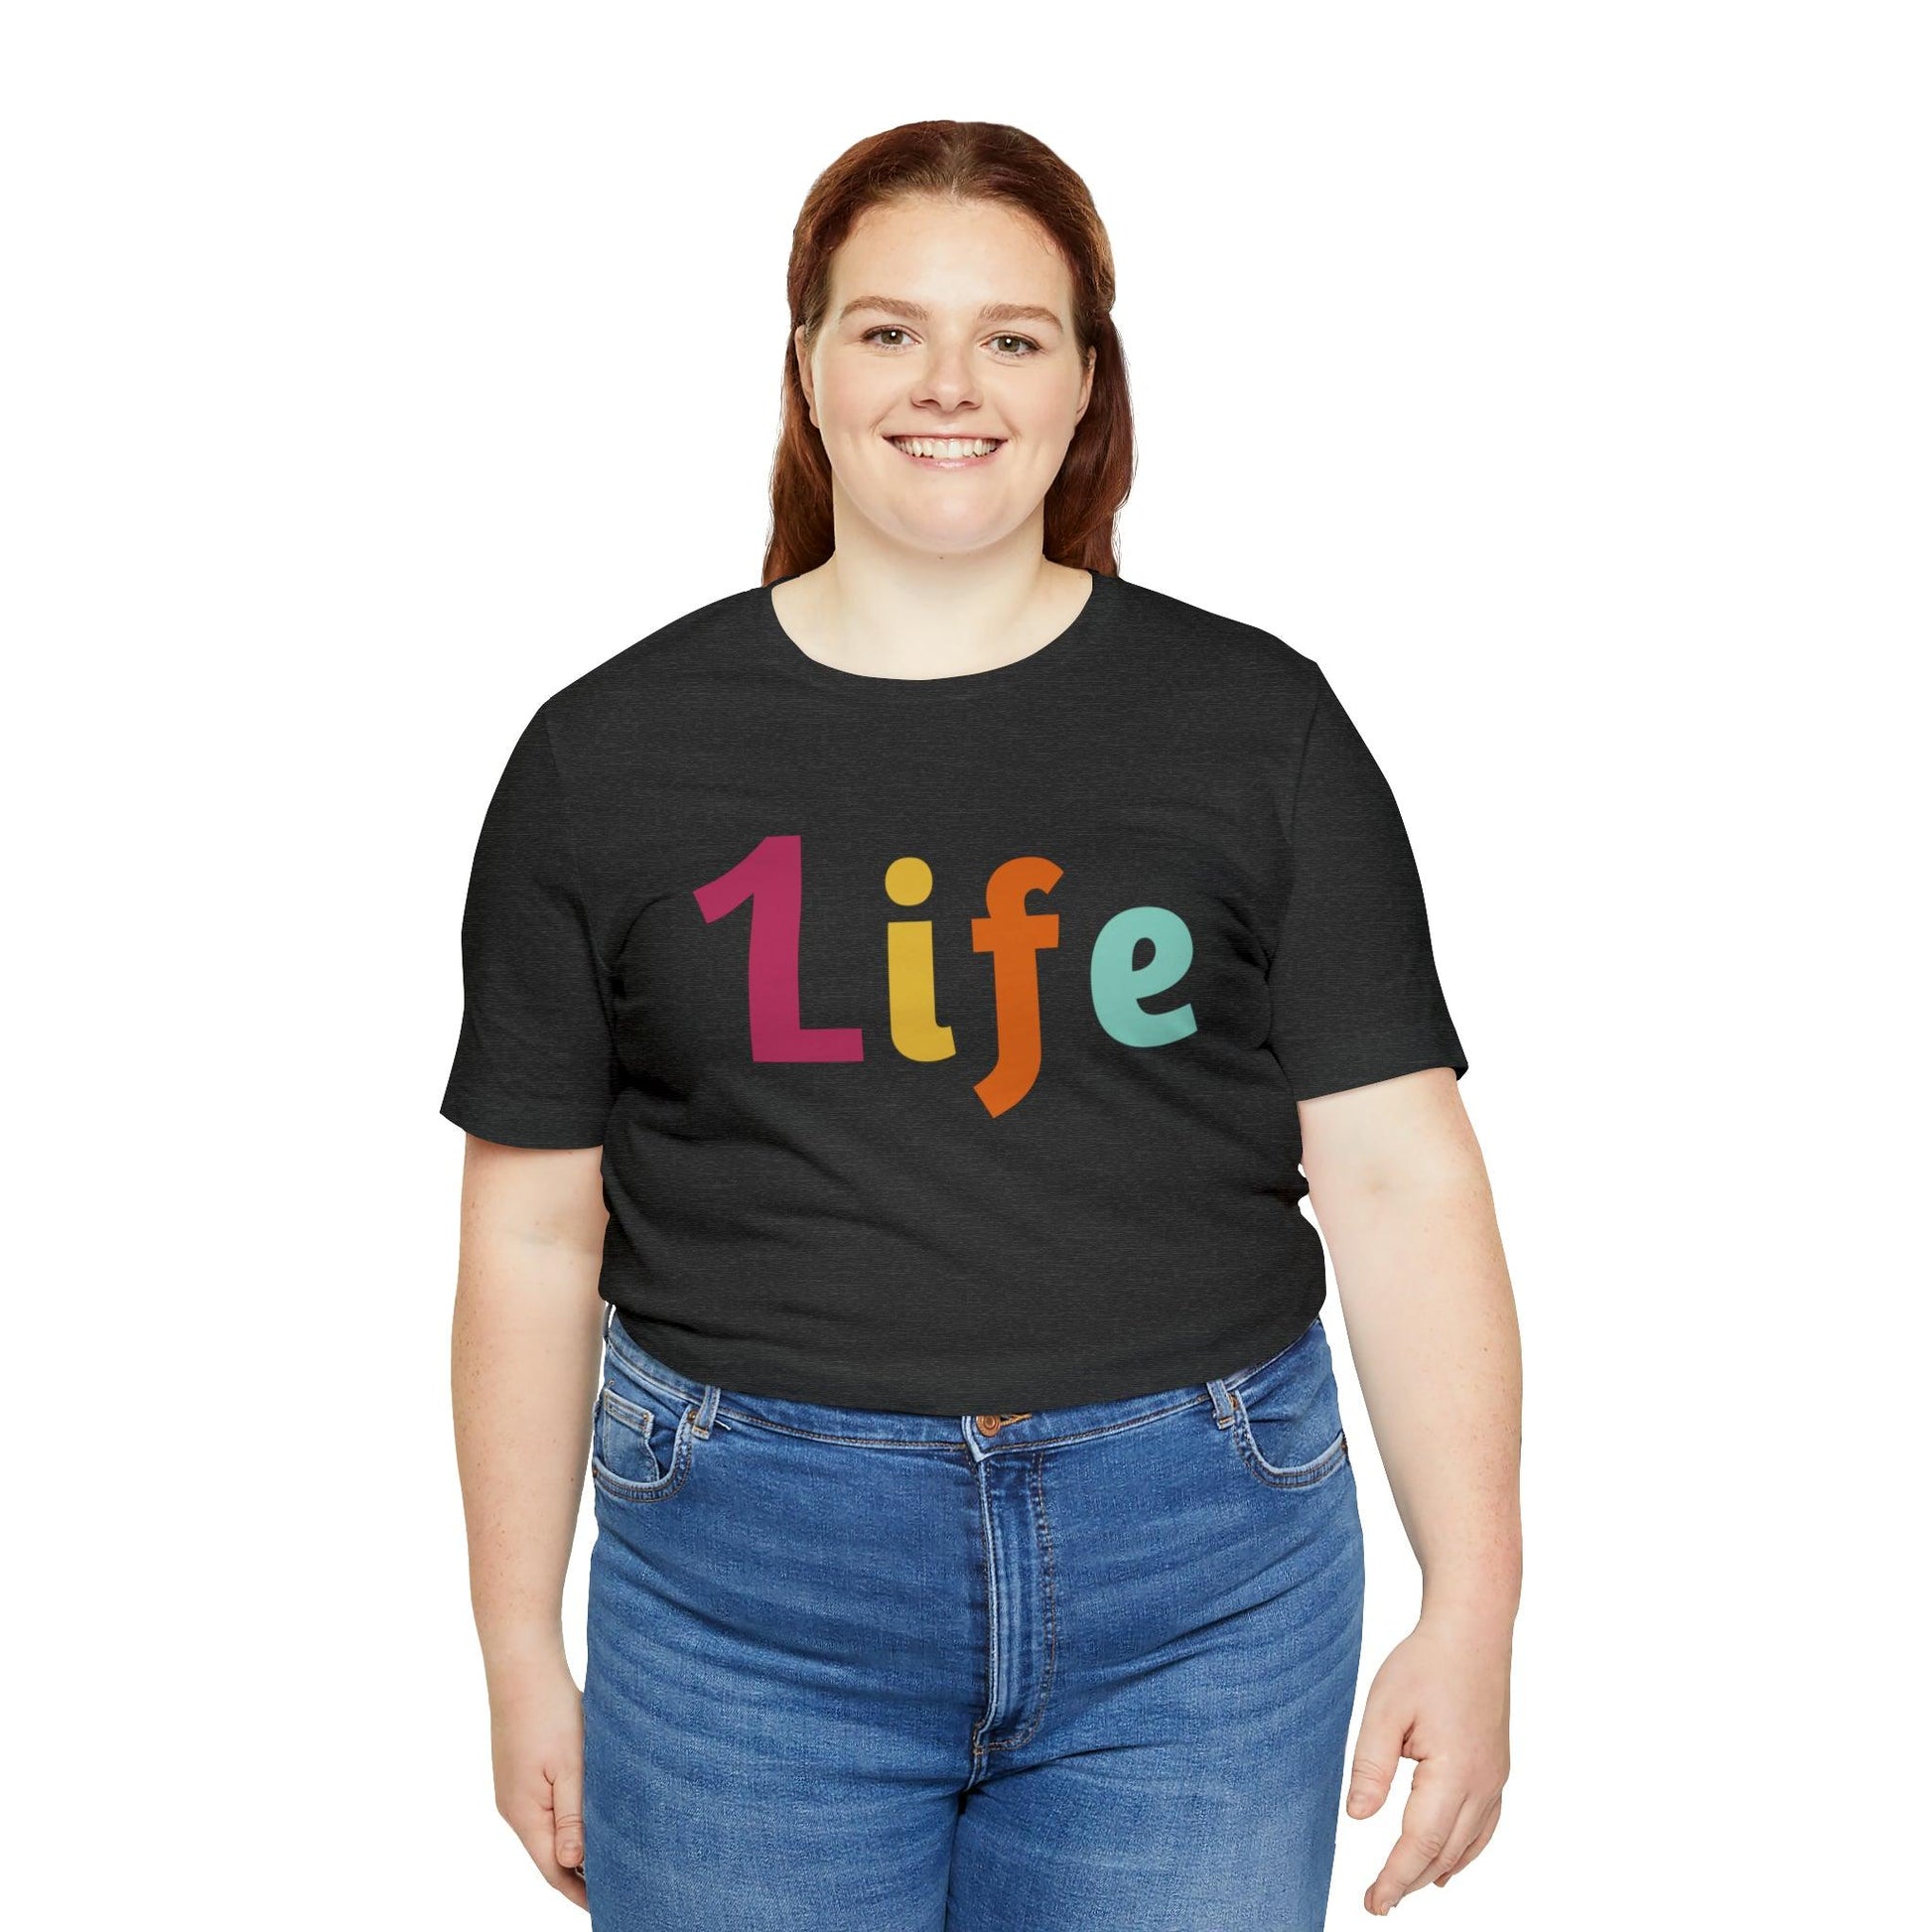 One life Shirt 1life shirt Live Your Life You Only Have One Life To Live Shirt - Giftsmojo